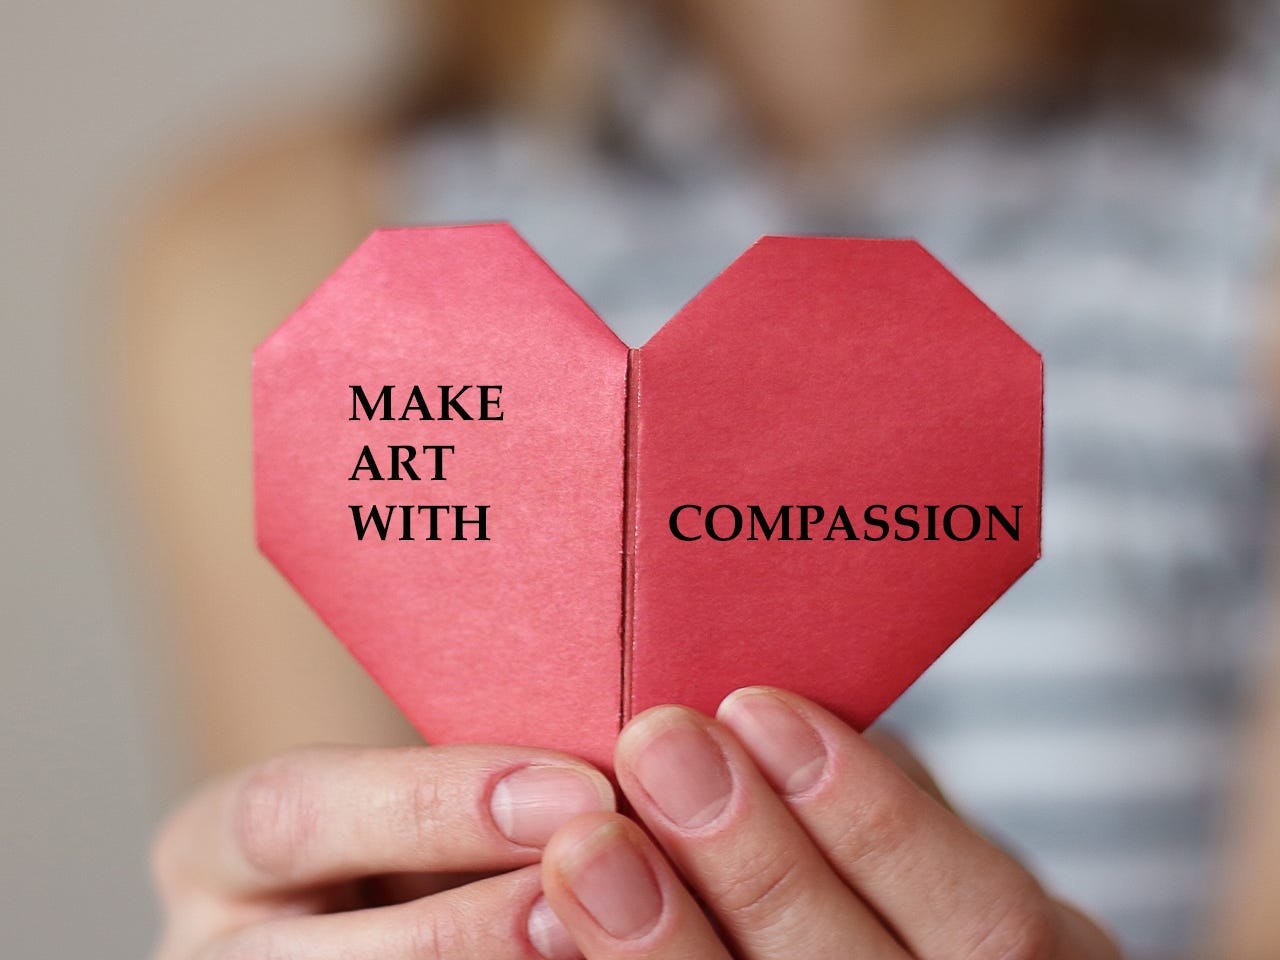 hands holding a heart with the text "Make Art with Compassion"